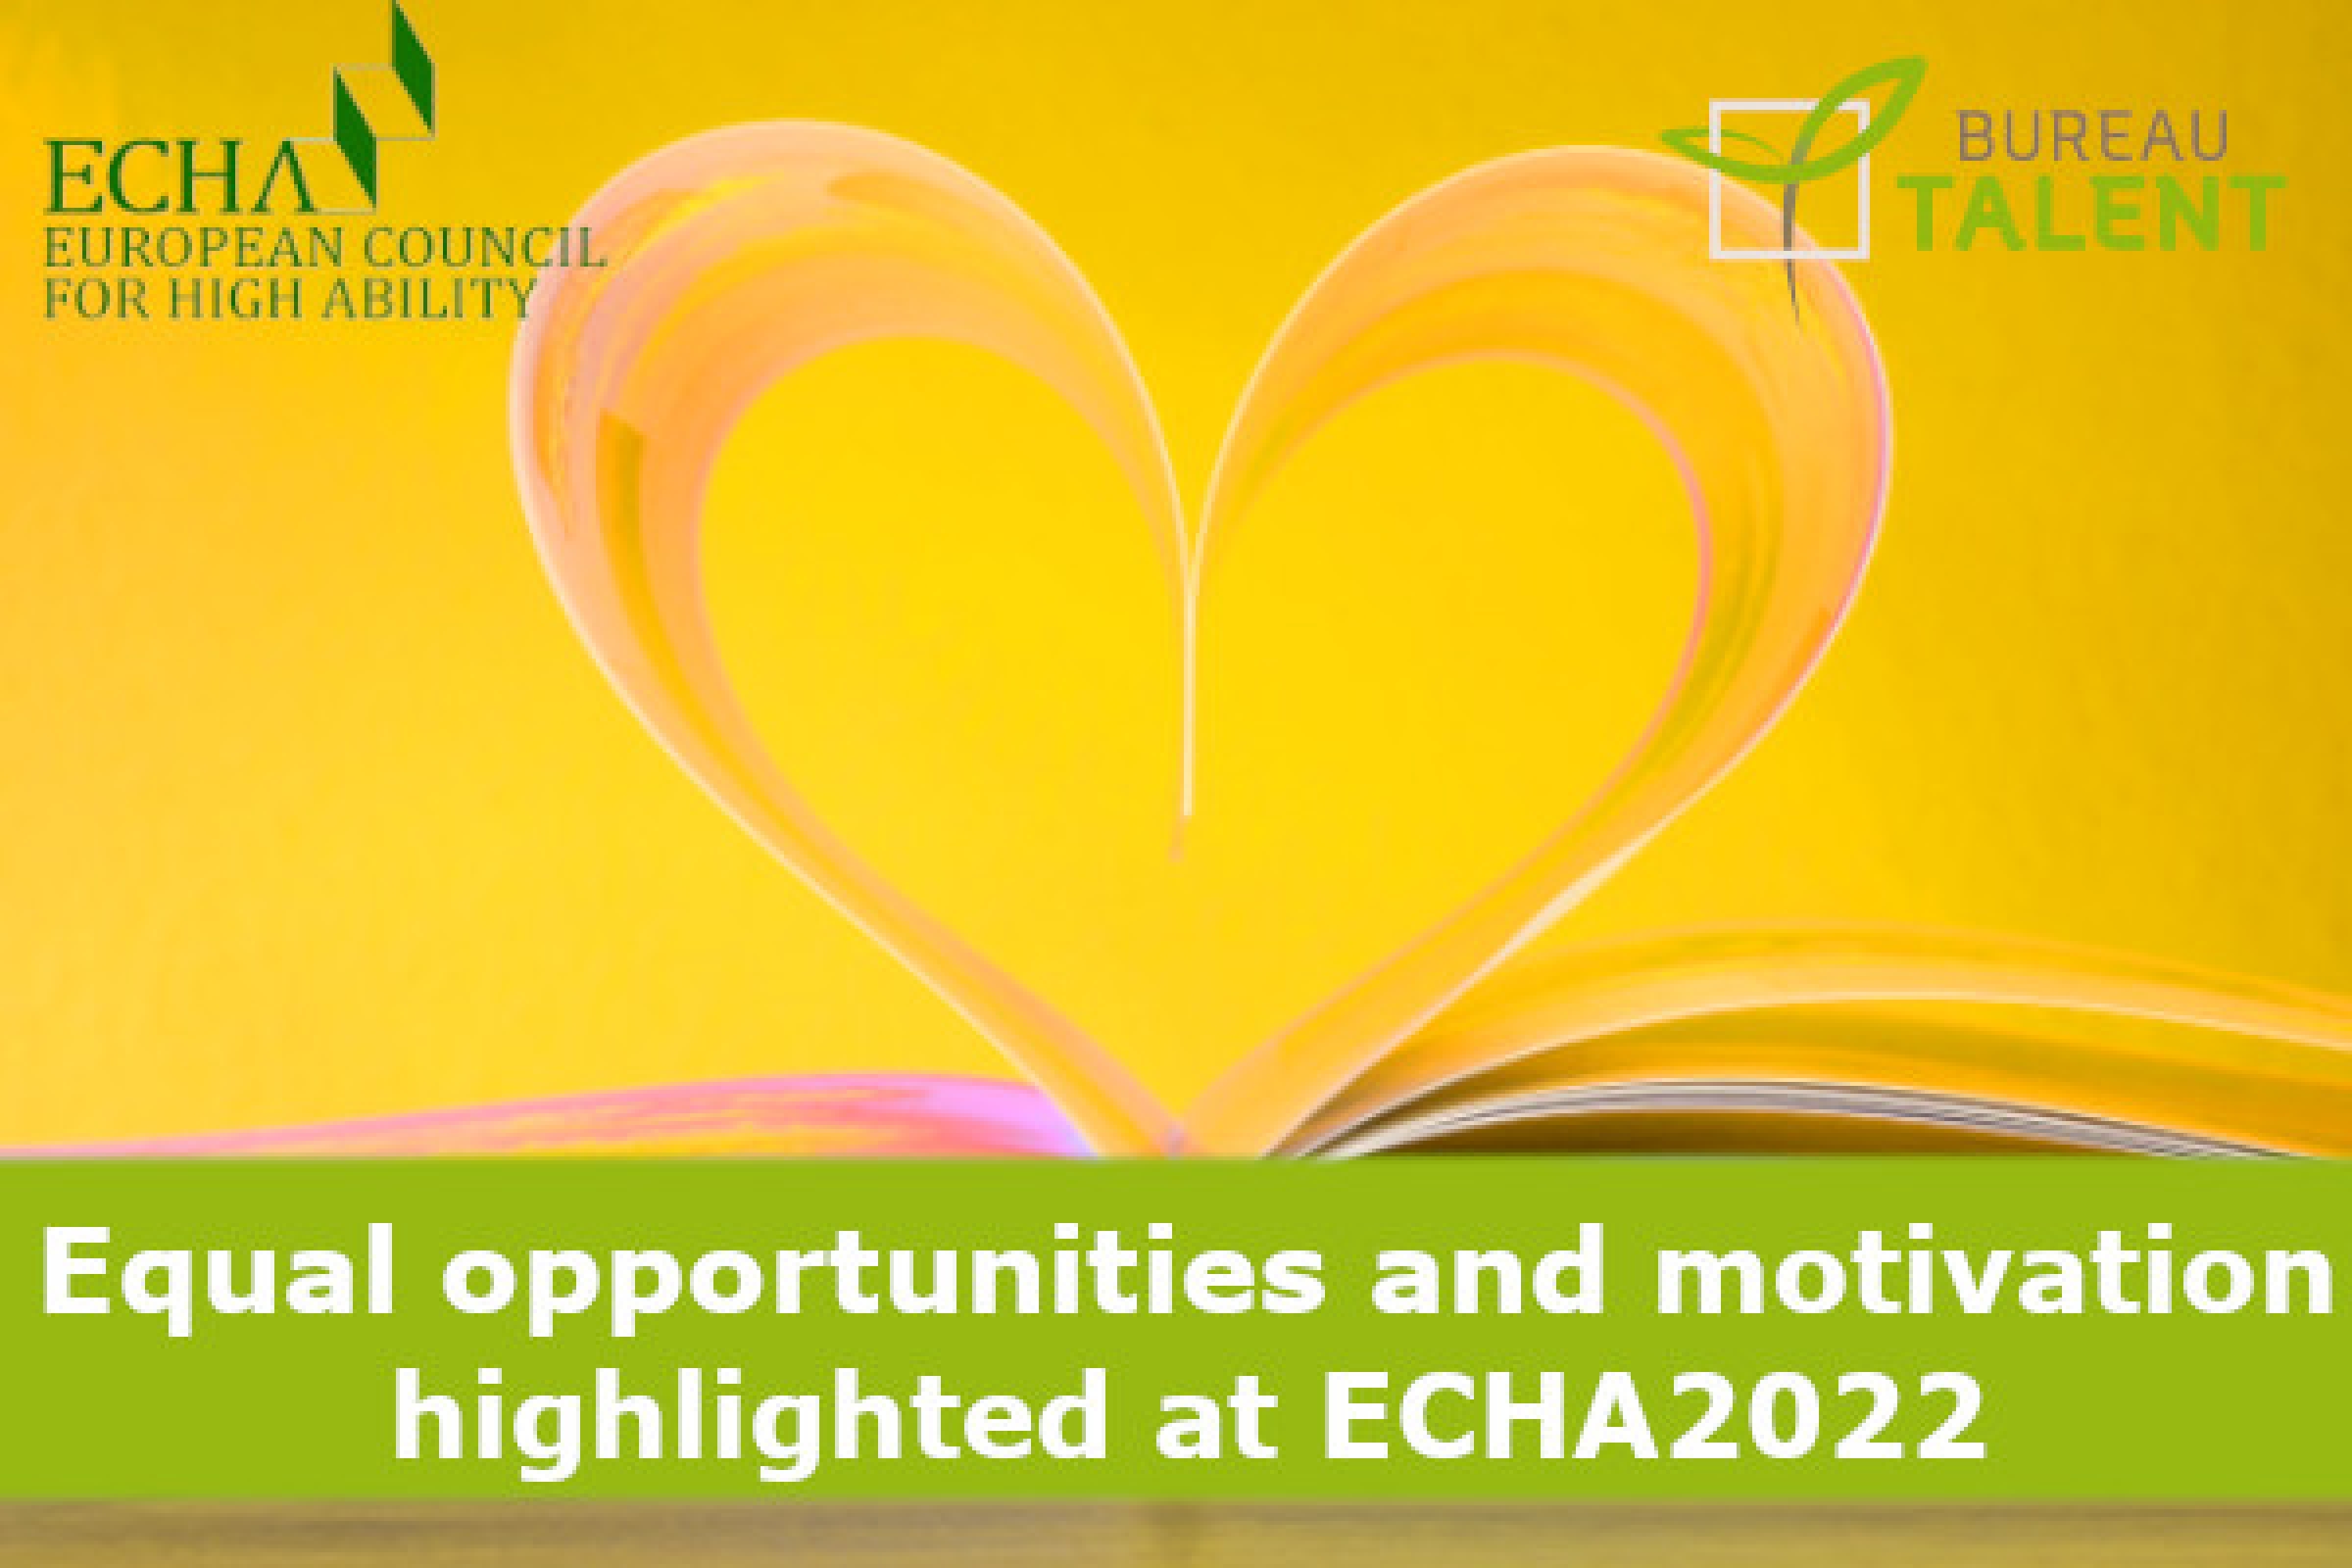 Equal opportunities and motivation at ECHA2022